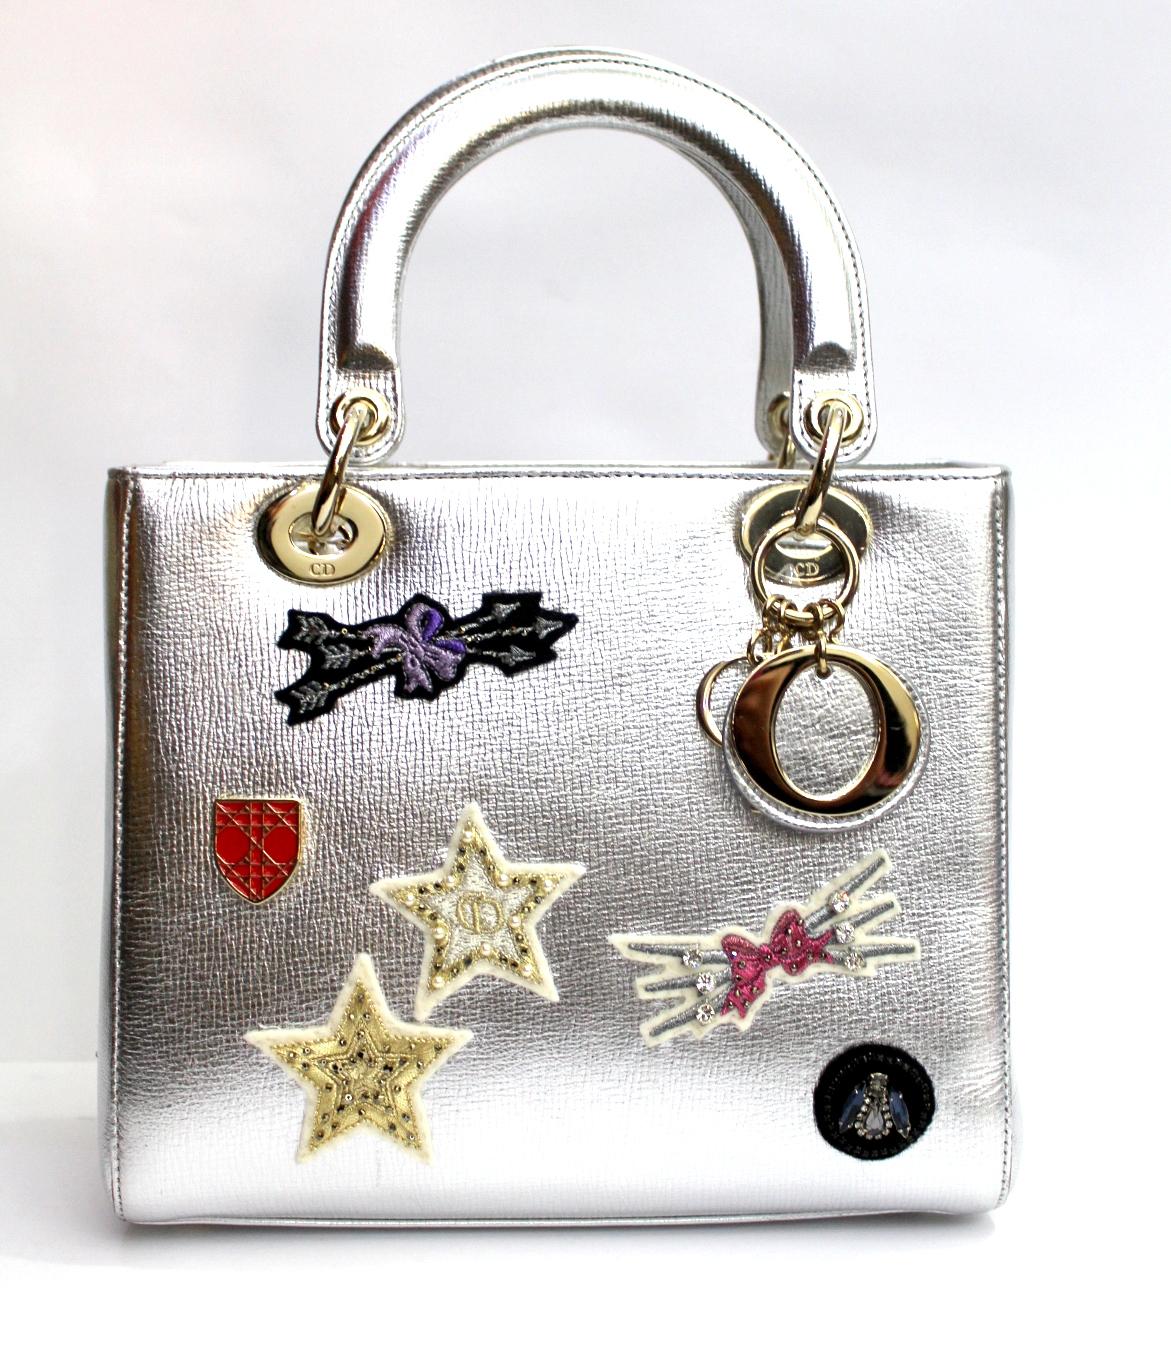 This authentic Christian Dior Lady Dior Patch Embellished Leather Medium presented in the brand's 2014 Collection mixes the timeless Lady Dior design with kitschy, work-of-art design made for the modern woman. Crafted from sleek silver leather with